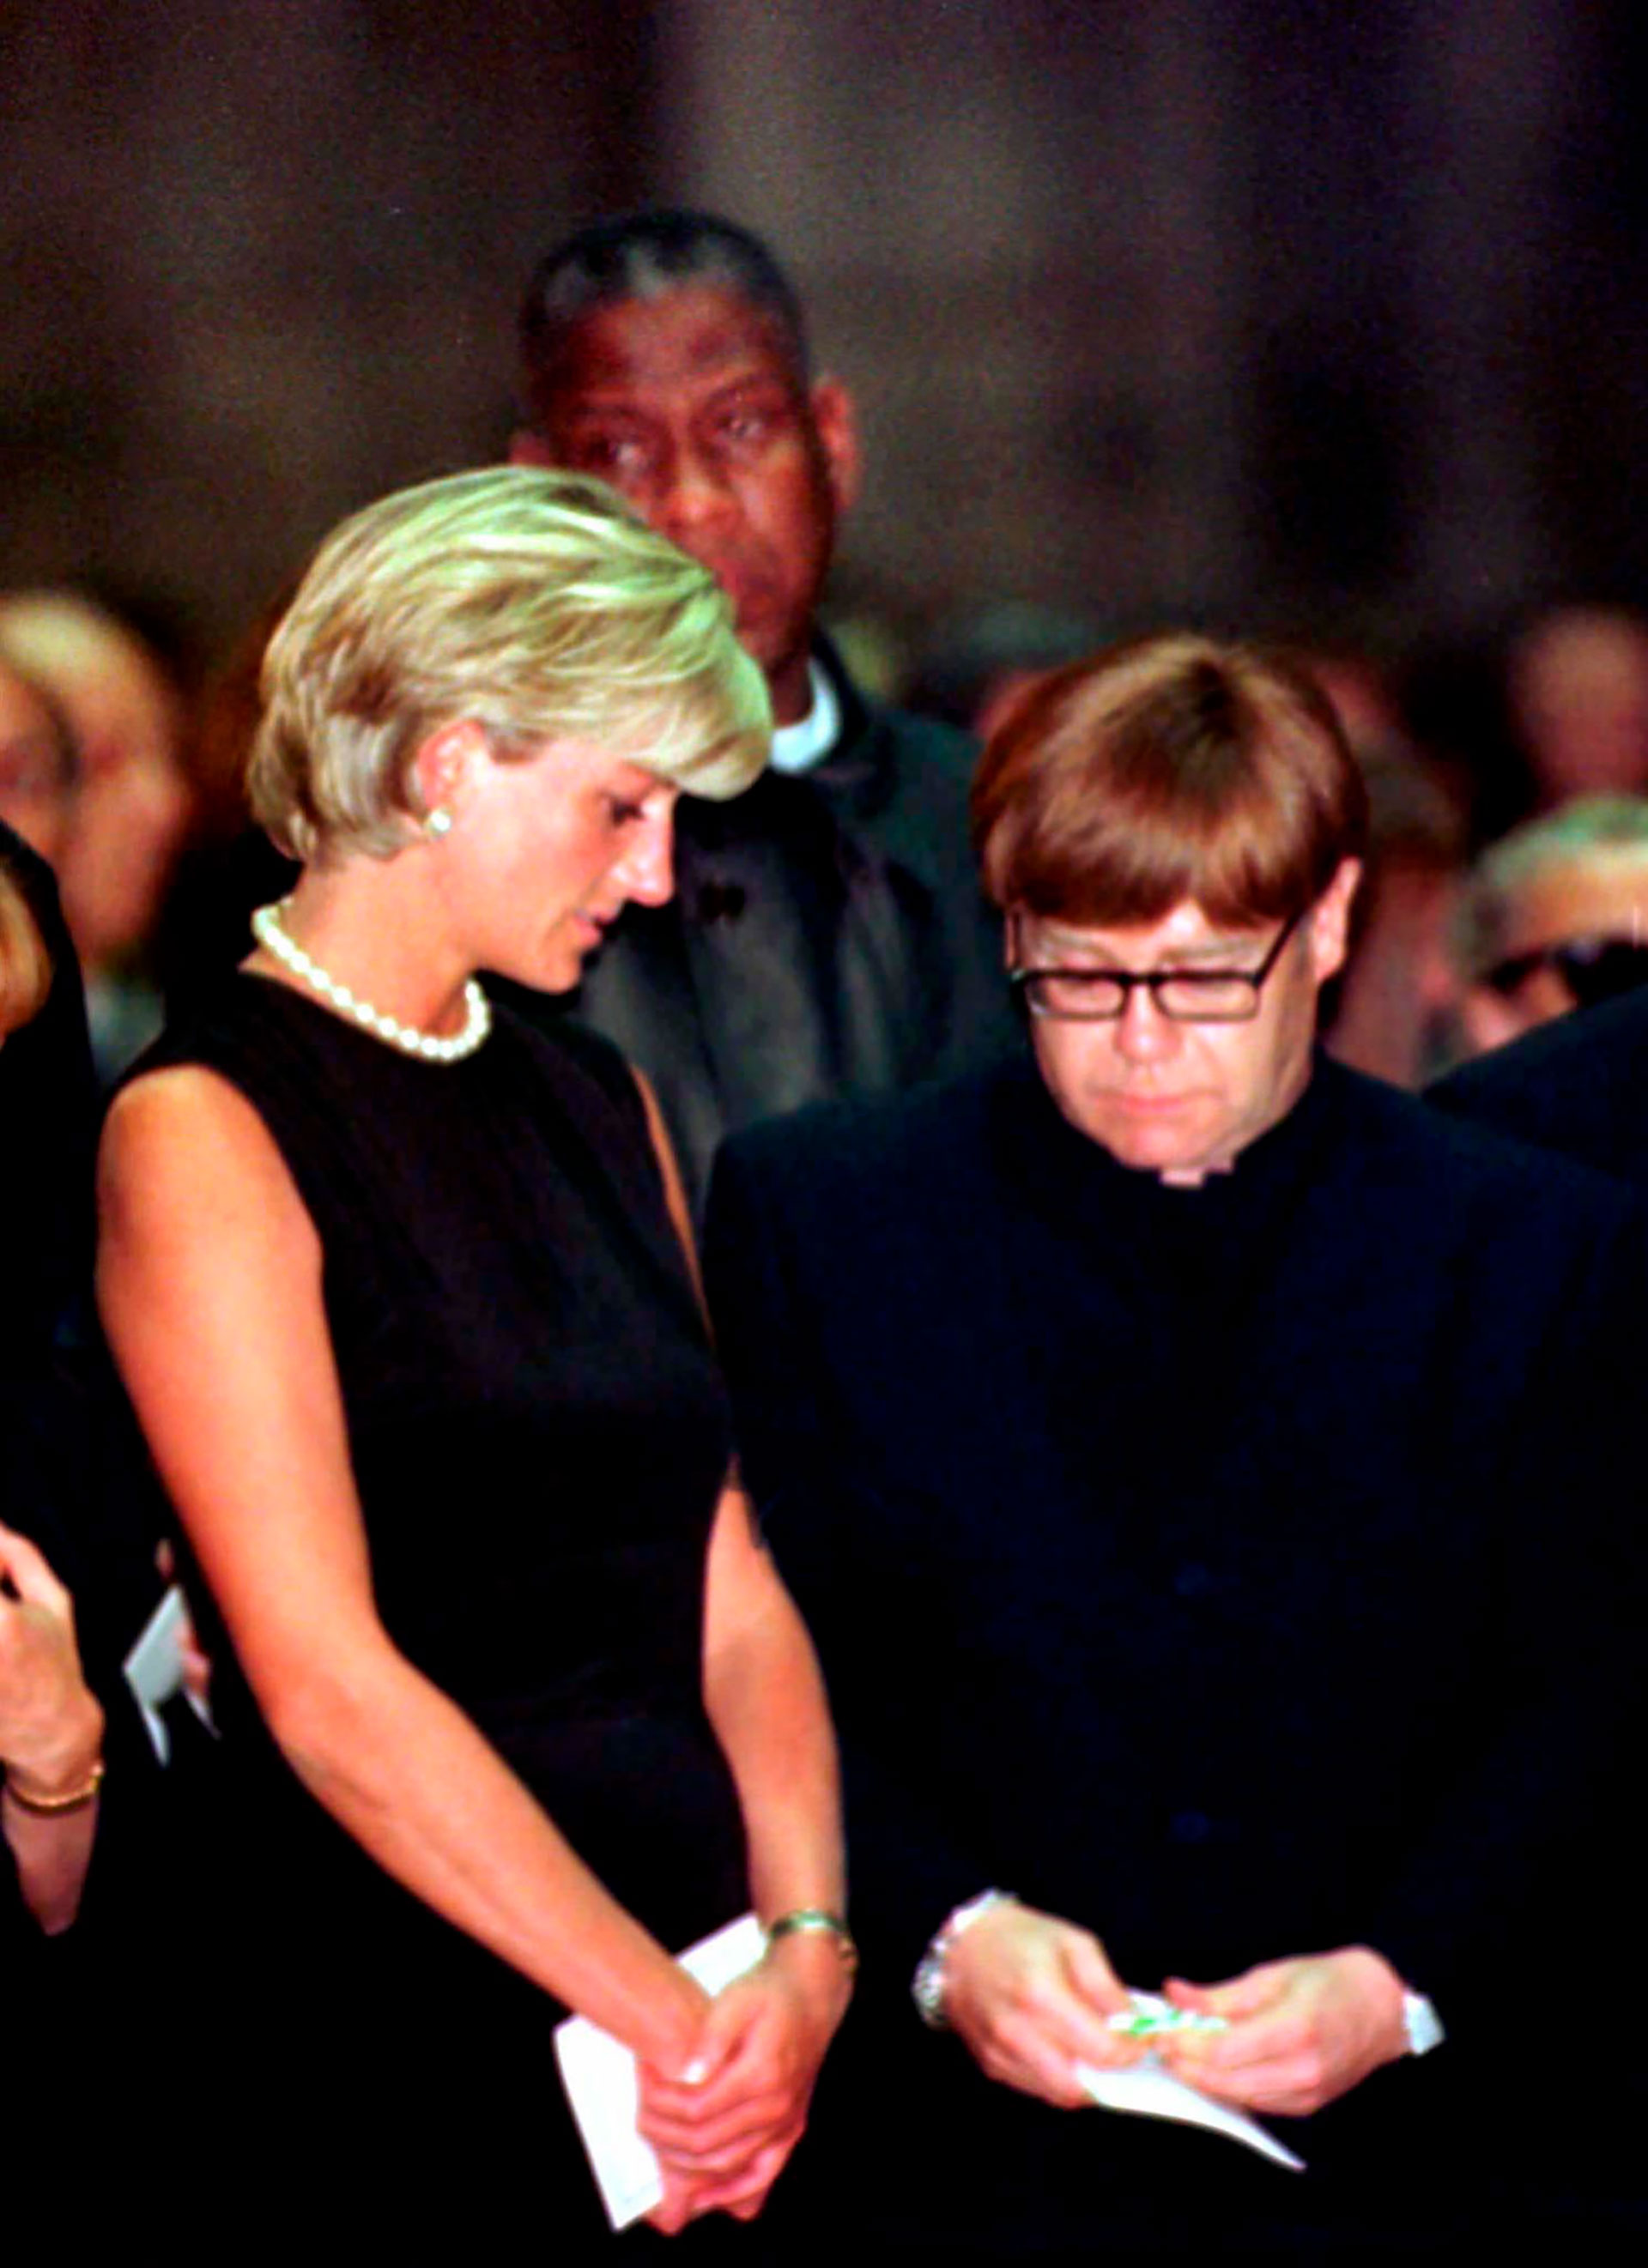 Princess Diana and Elton John together at Gianni Versace's funeral (Photo: VERSACE ITALY)